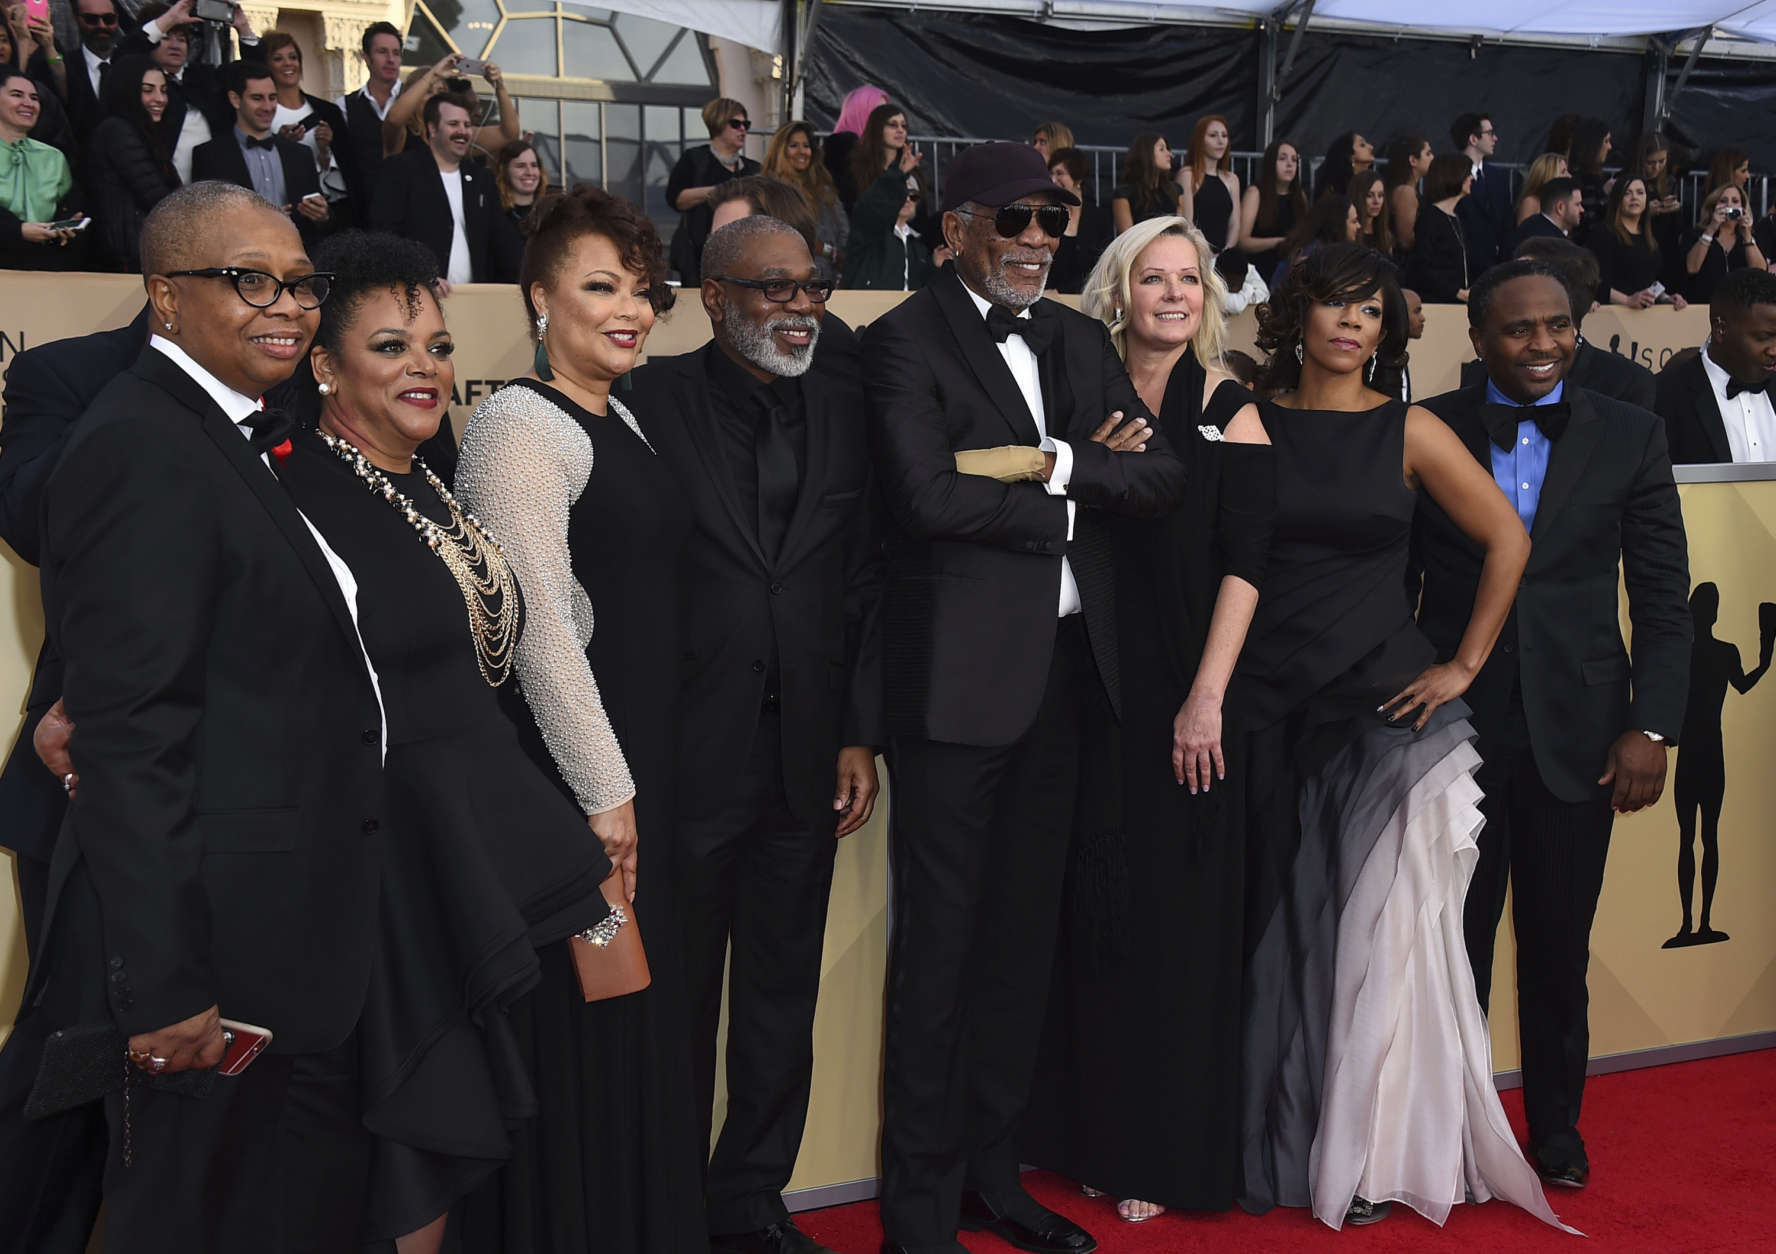 Morgan Freeman and his family arrive at the 24th annual Screen Actors Guild Awards at the Shrine Auditorium &amp; Expo Hall on Sunday, Jan. 21, 2018, in Los Angeles. (Photo by Jordan Strauss/Invision/AP)